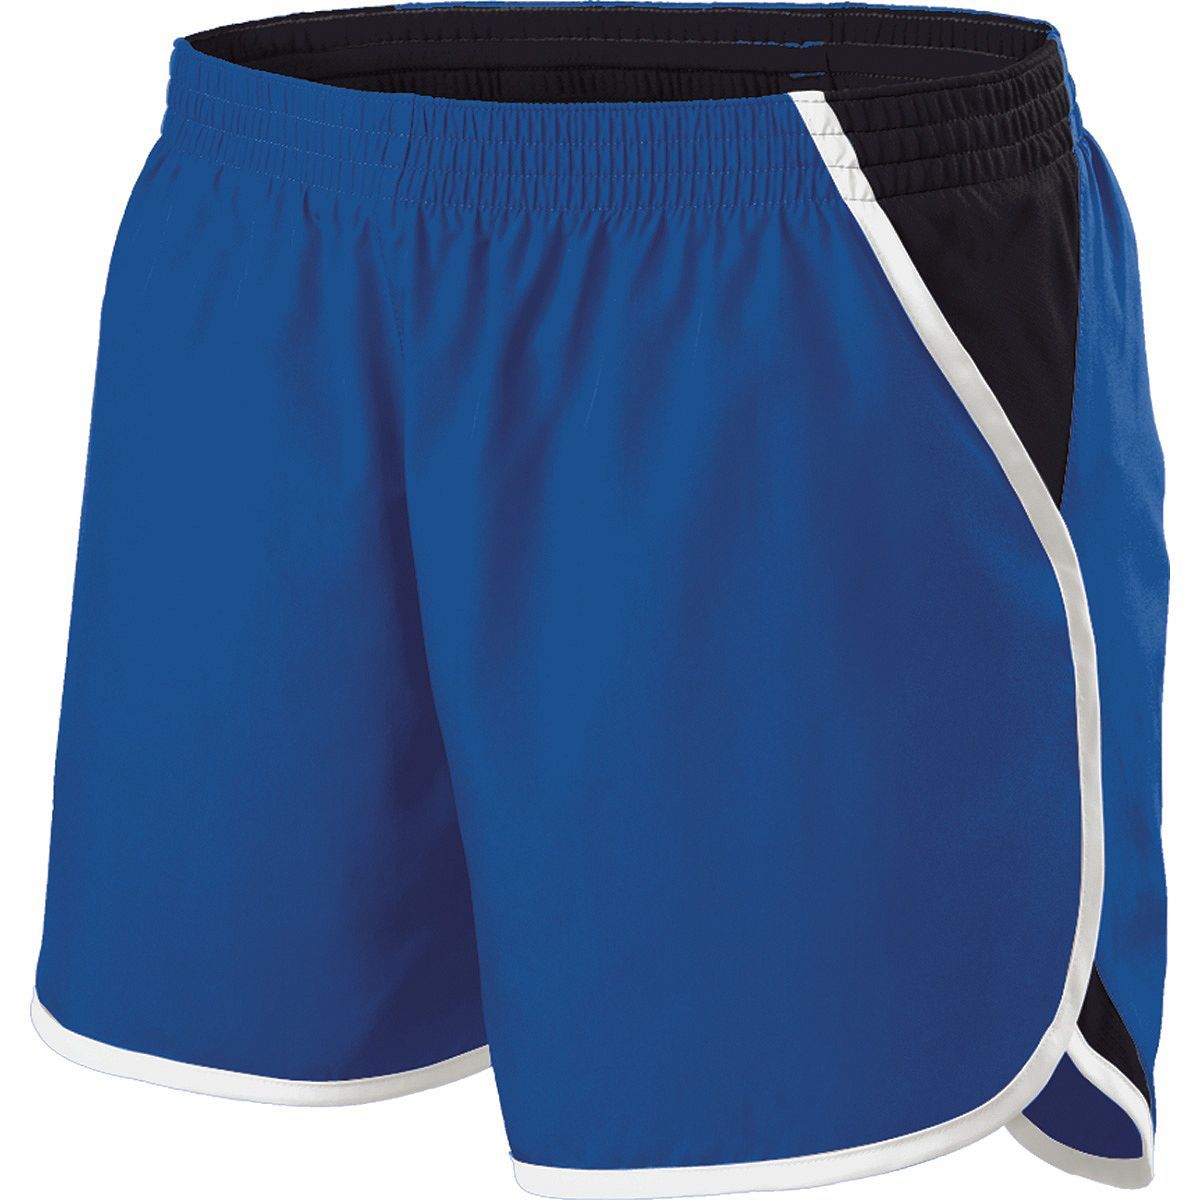 Holloway Energize Shorts in Royal/Black/White  -Part of the Ladies, Ladies-Shorts, Holloway product lines at KanaleyCreations.com